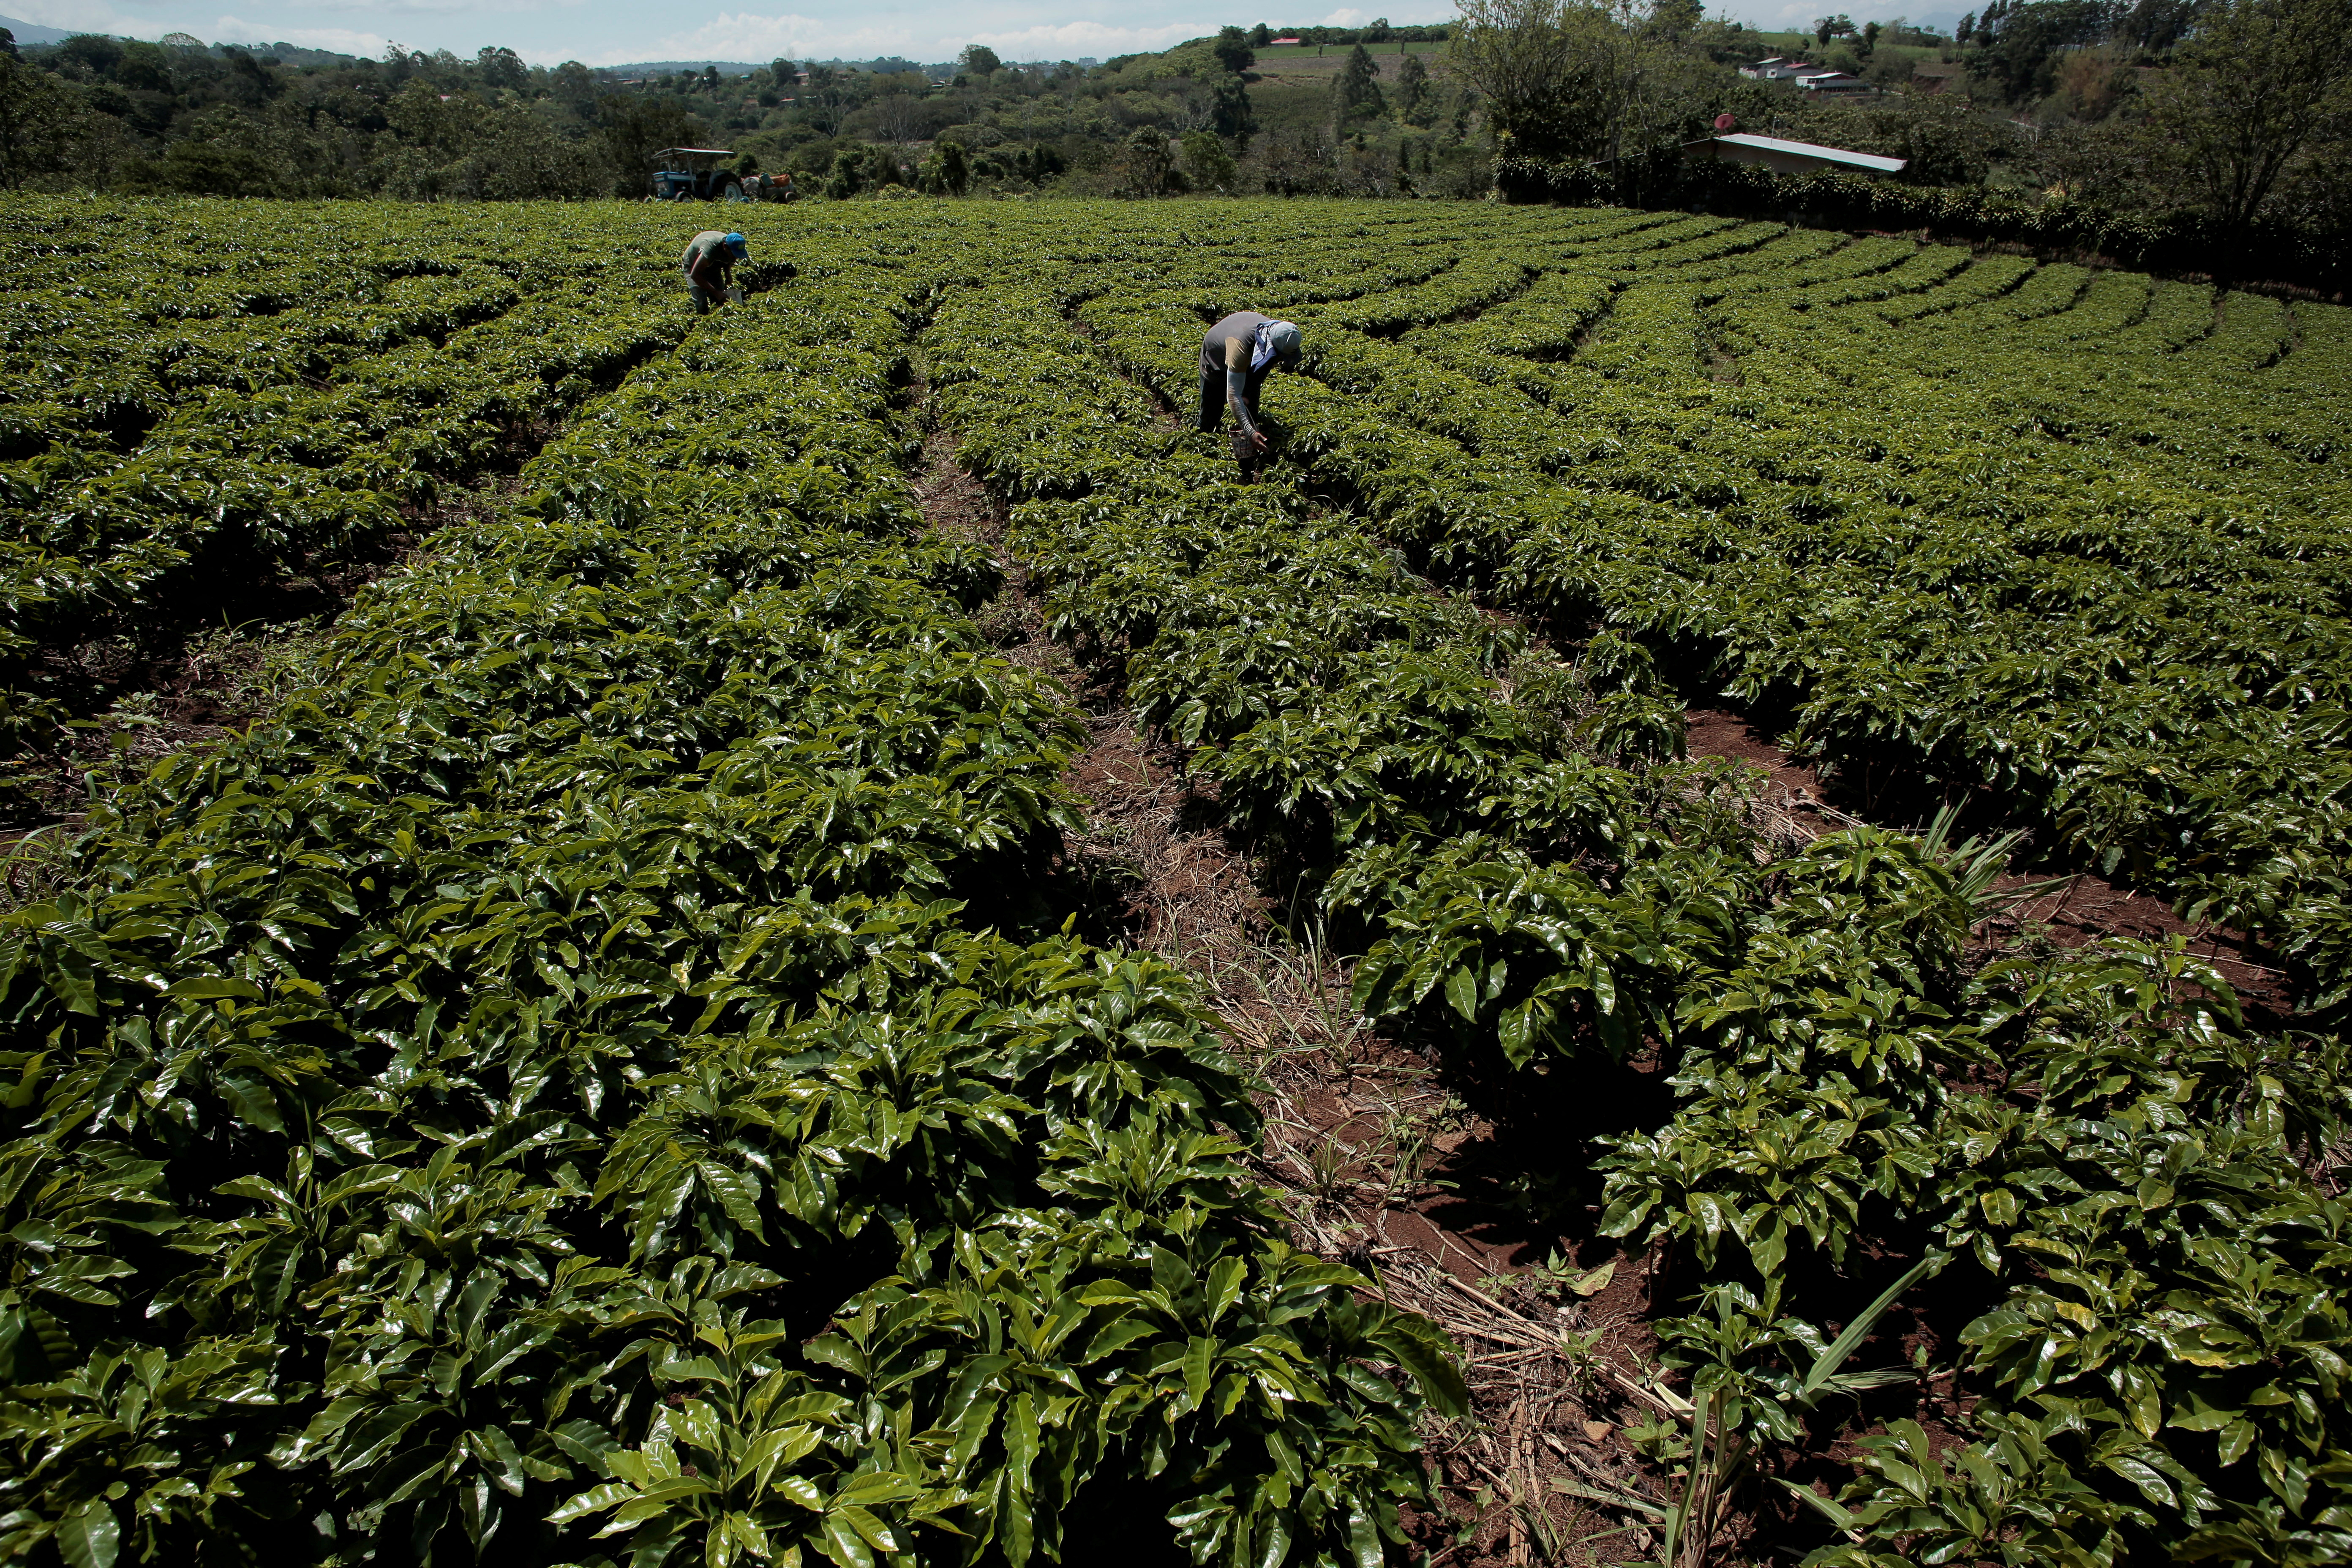 Laborers work among rows of coffee plants at a coffee plantation